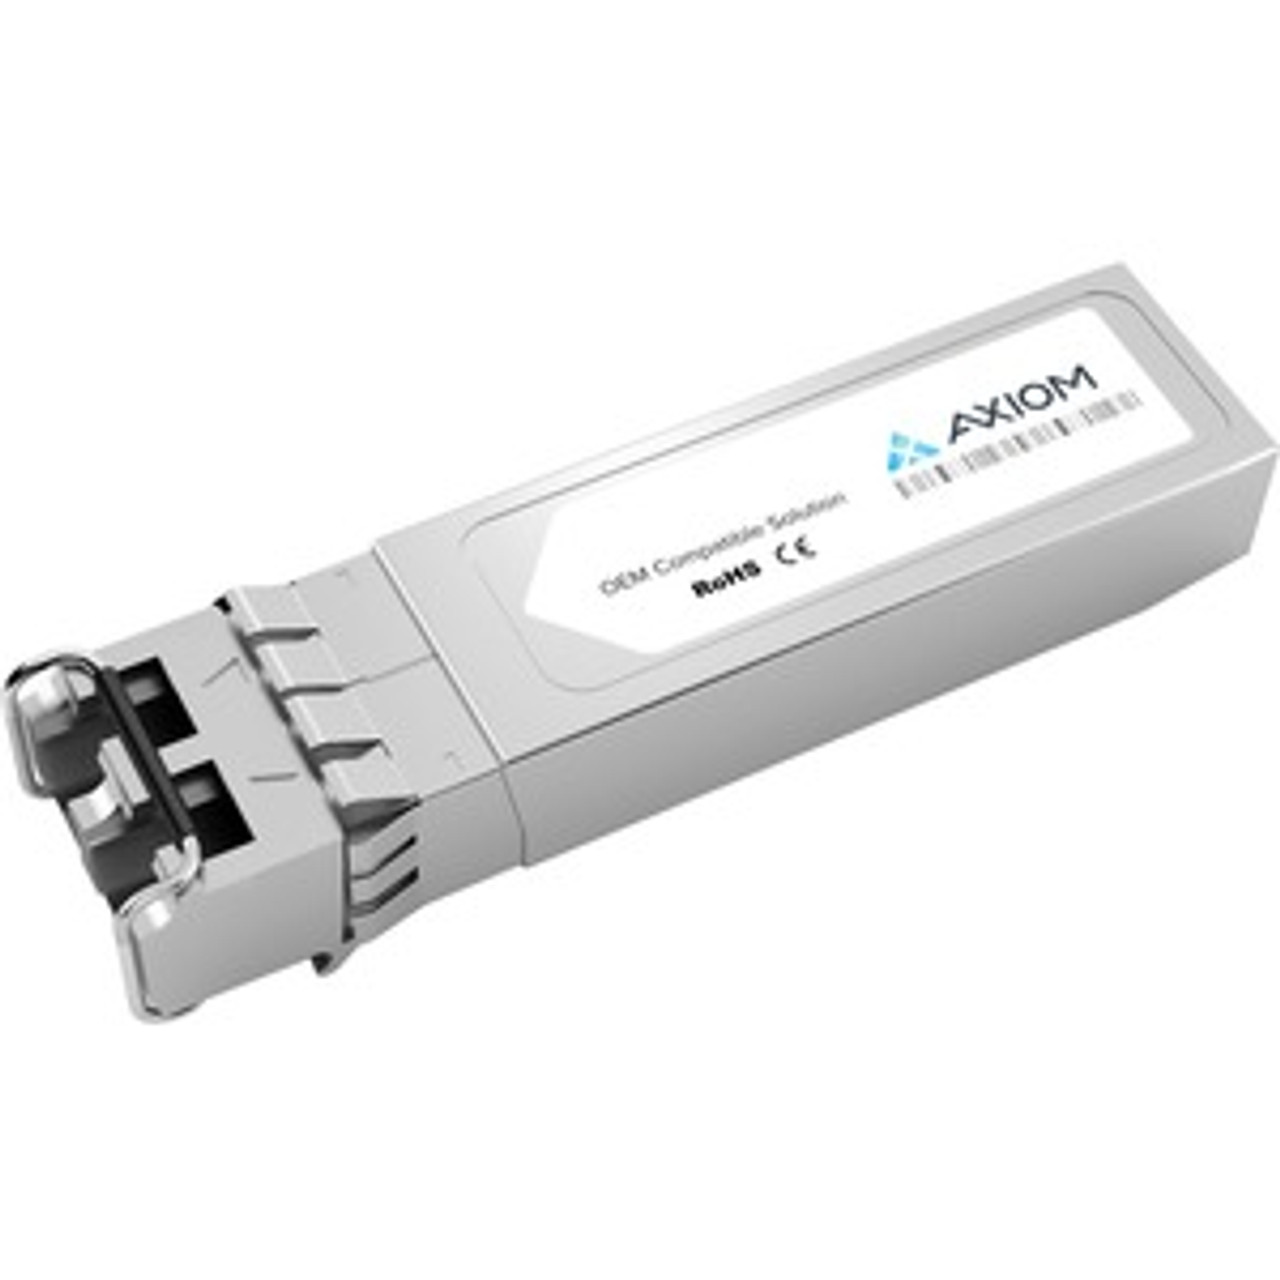 10310-ACC Accortec 10Gbps 10GBase-ZR Single-mode Fiber 80km 1550nm LC Connector SFP+ Transceiver Module for Extreme Networks Compatible